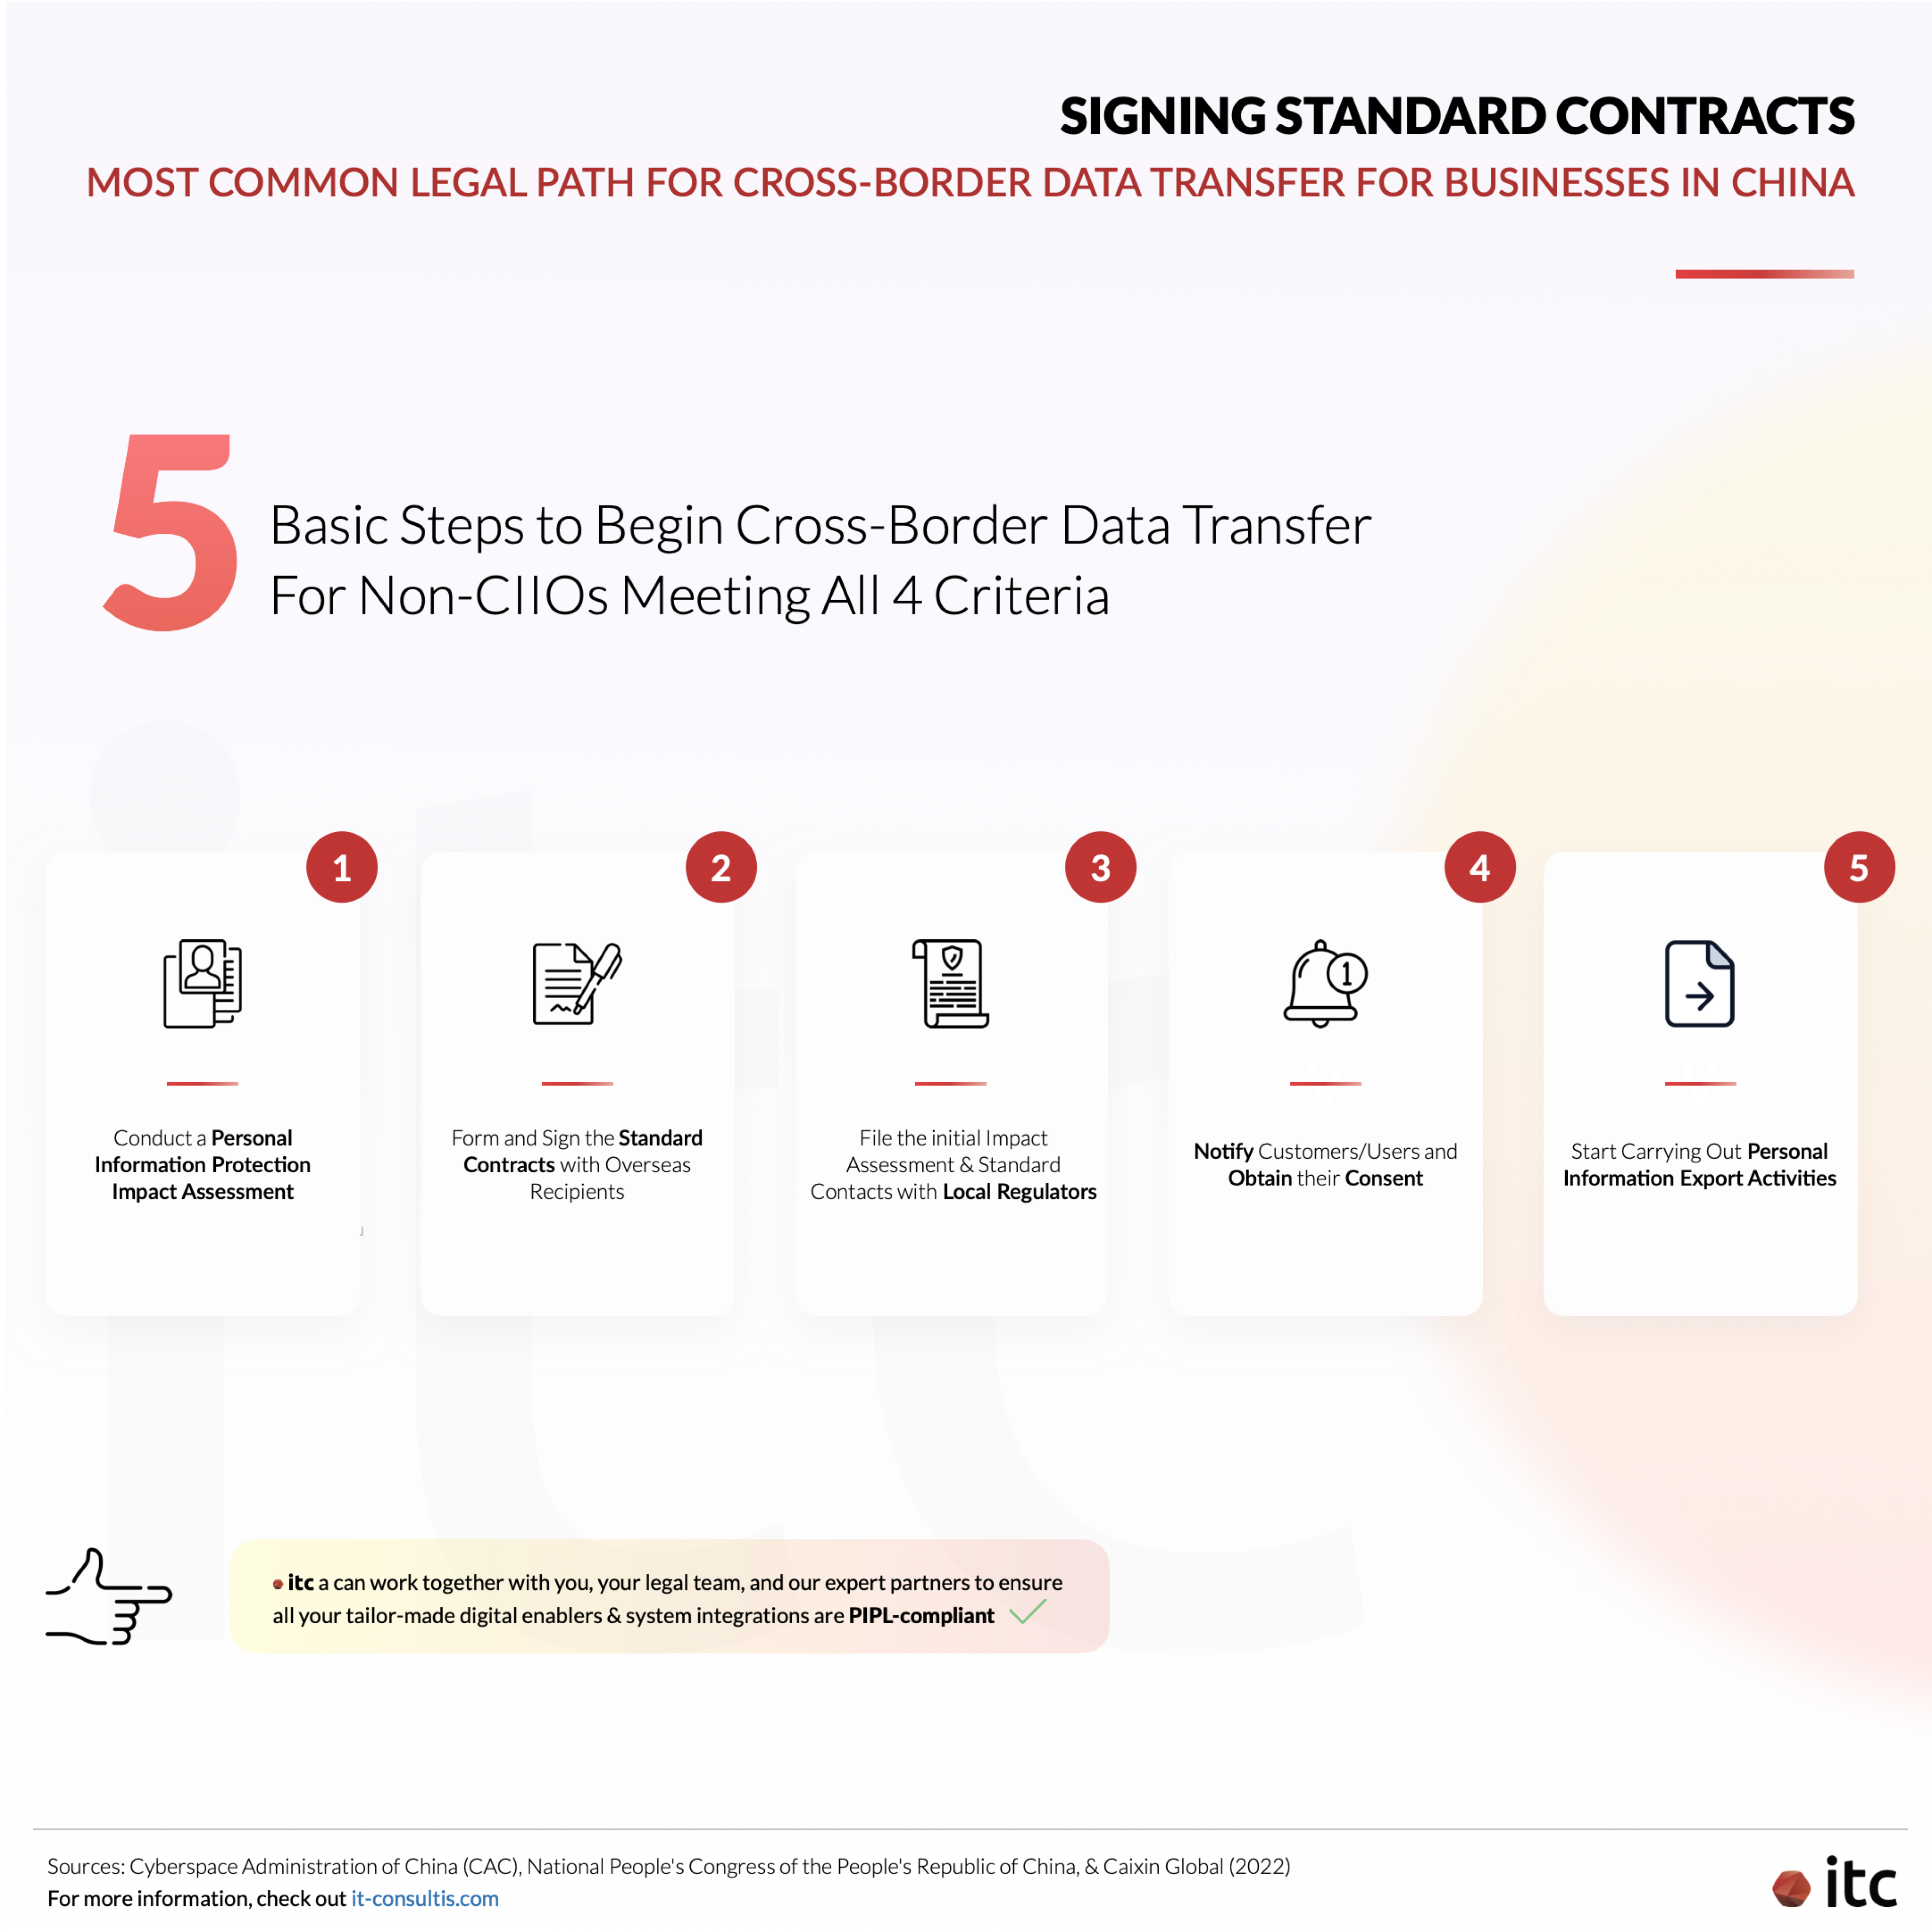 5 basic steps to start transferring data across the borders of China for Non-CIIOs who are qualified for signing standard contracts with overseas recipients